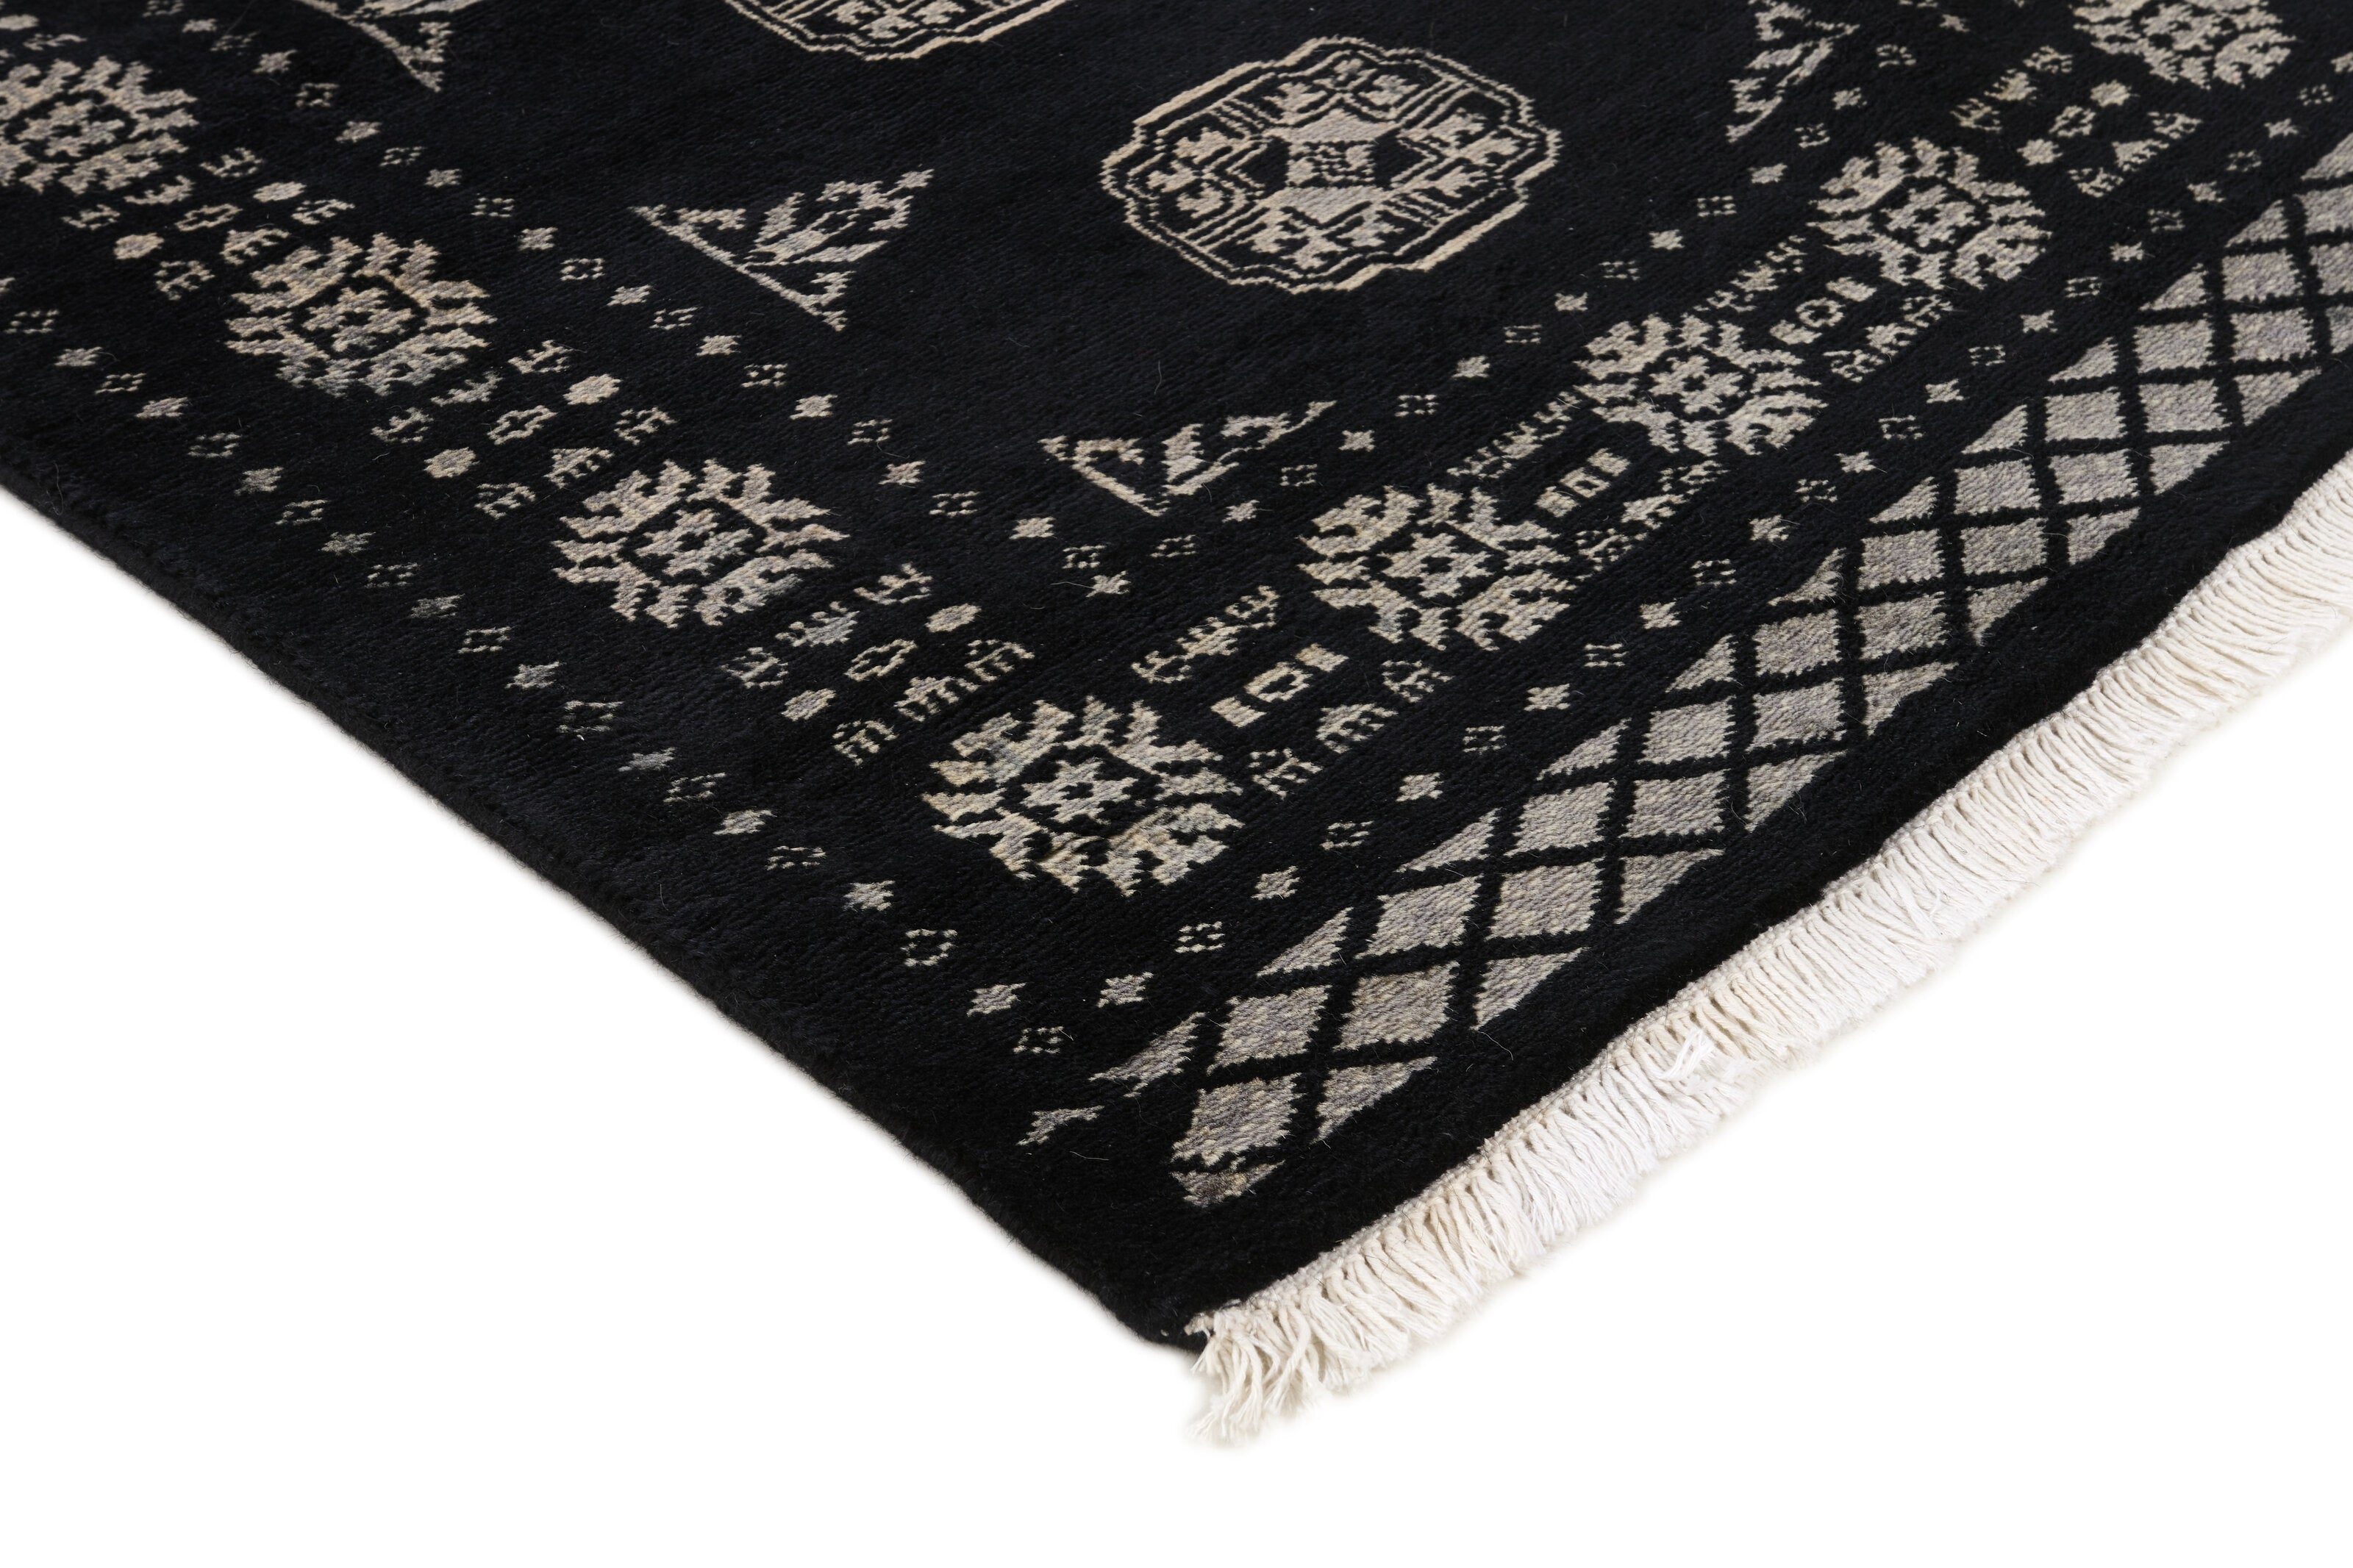 Black Oriental runner with traditional bordered pattern